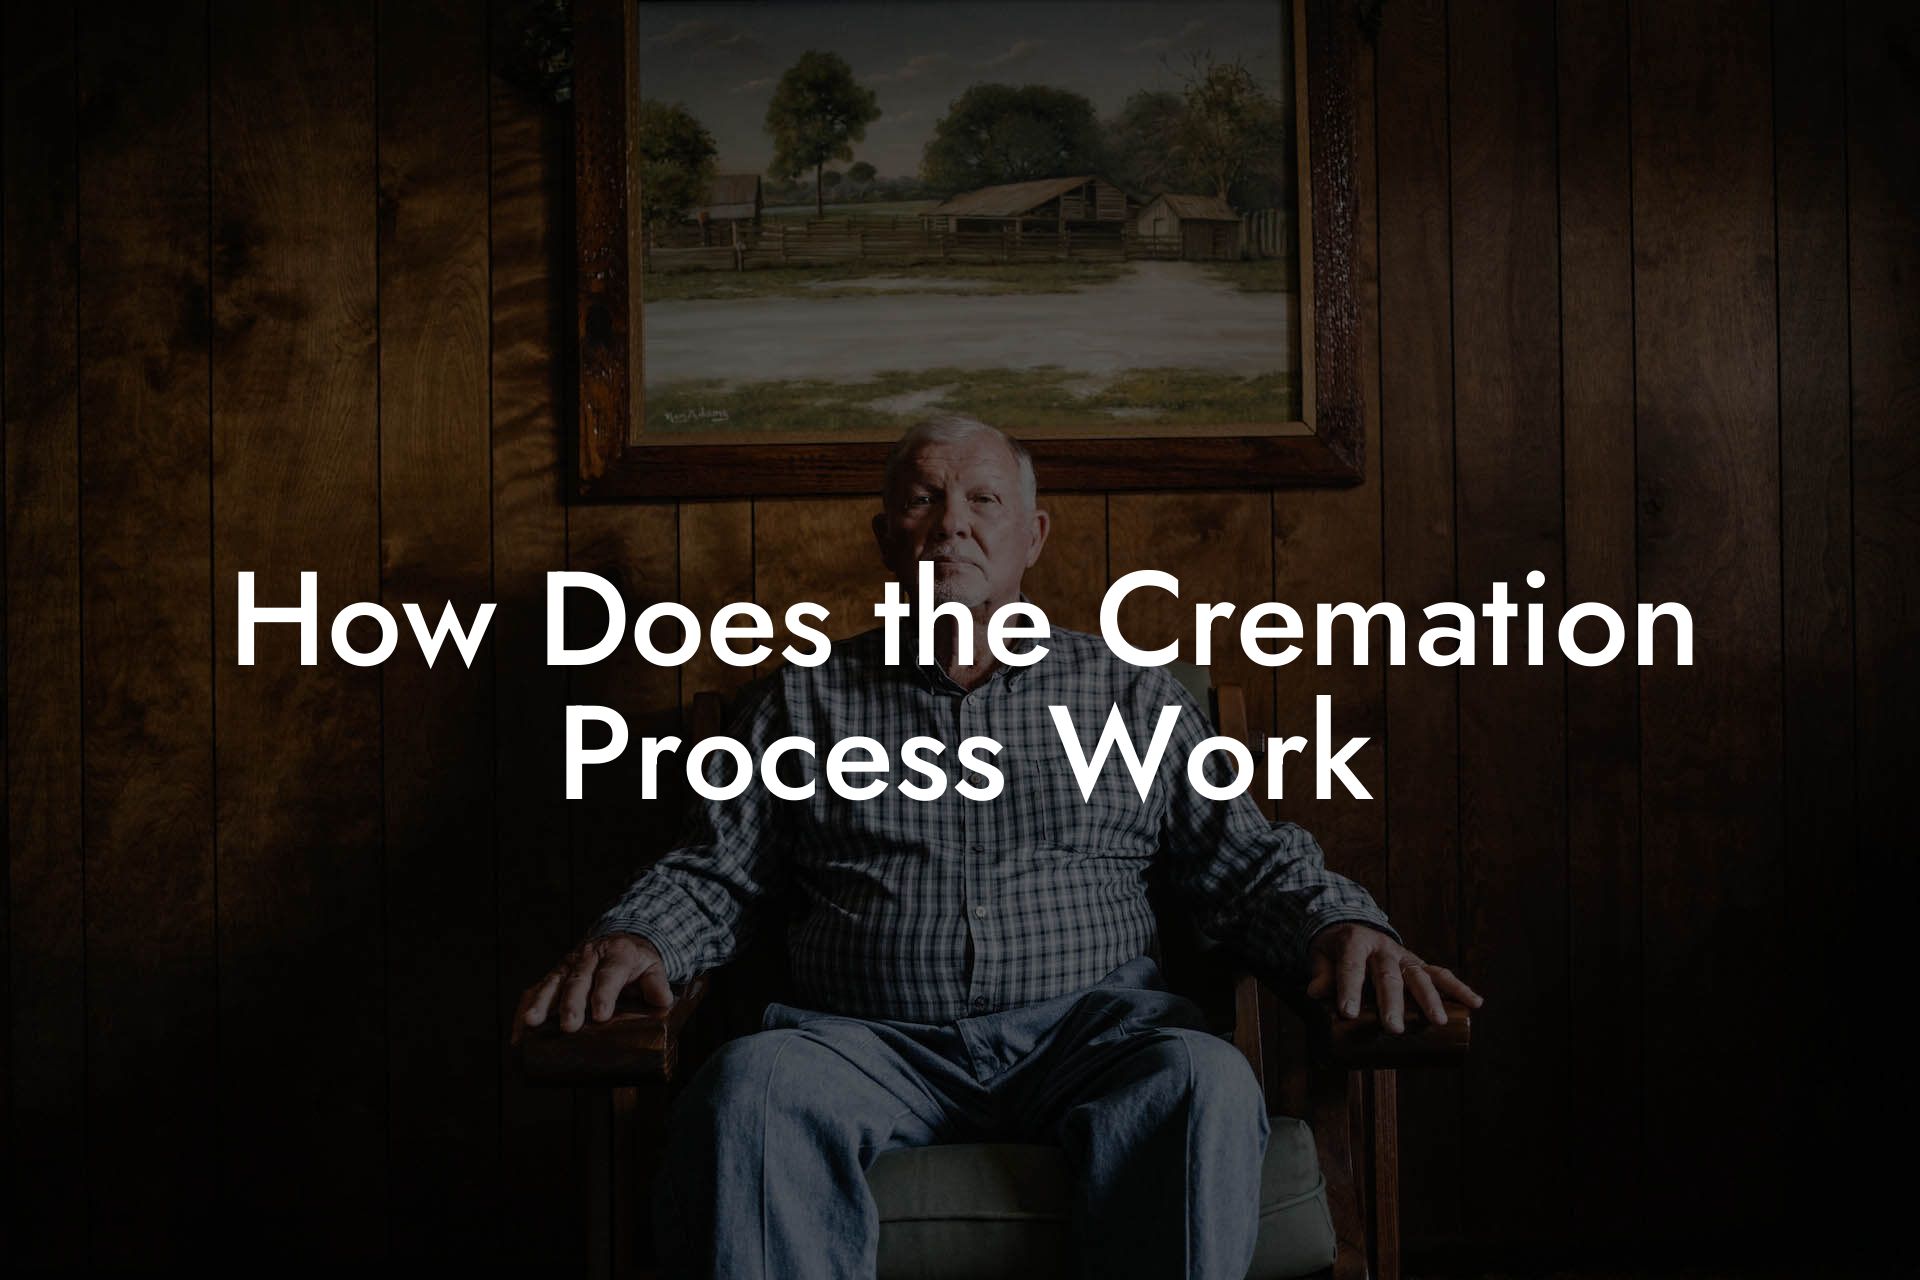 How Does the Cremation Process Work